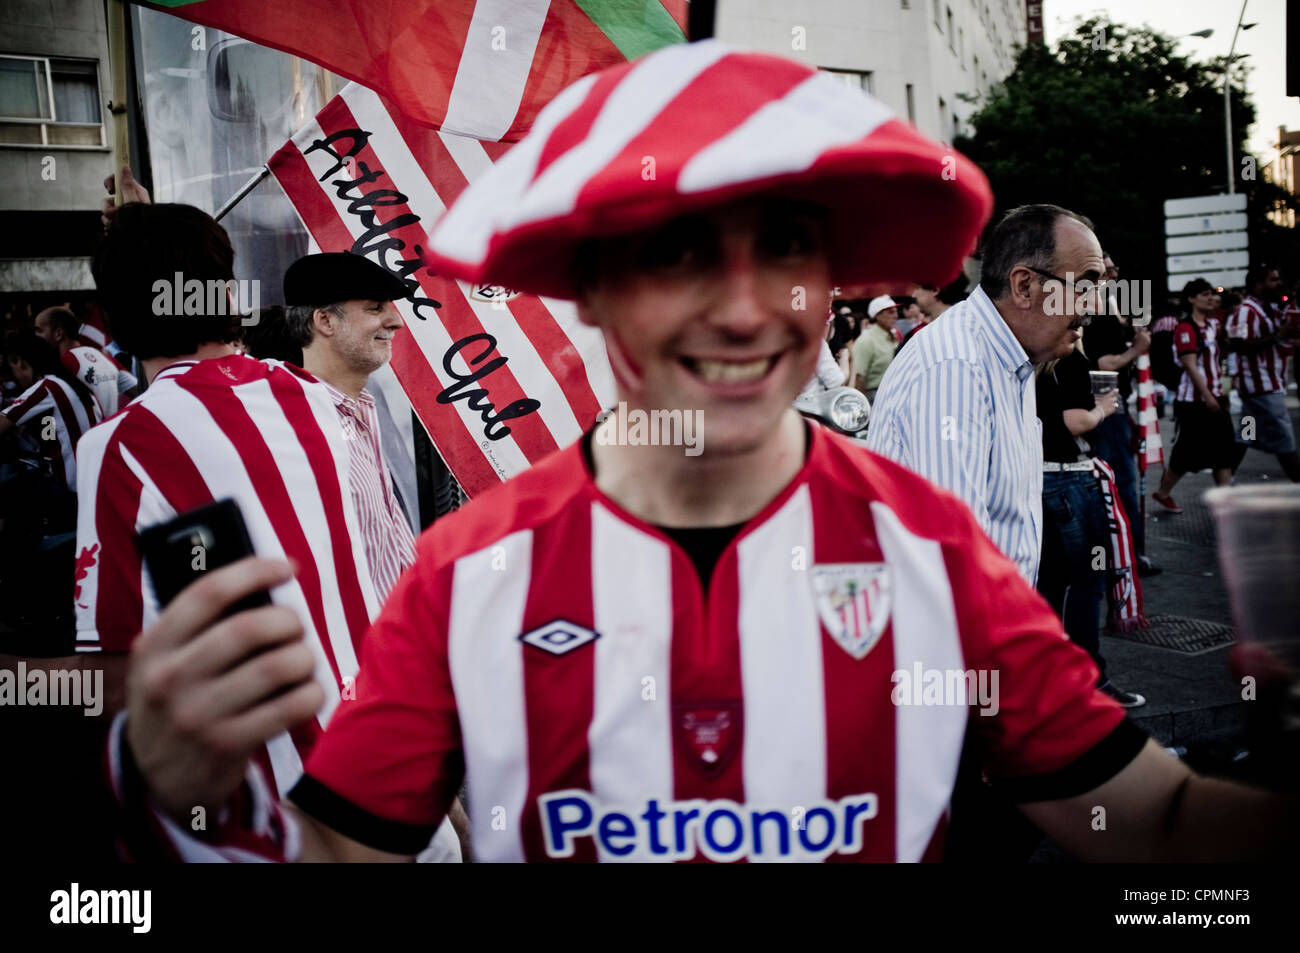 Athletic Bilbao fans in Madrid before Copa del Rey 2012 Final against FC Barcelona. Stock Photo